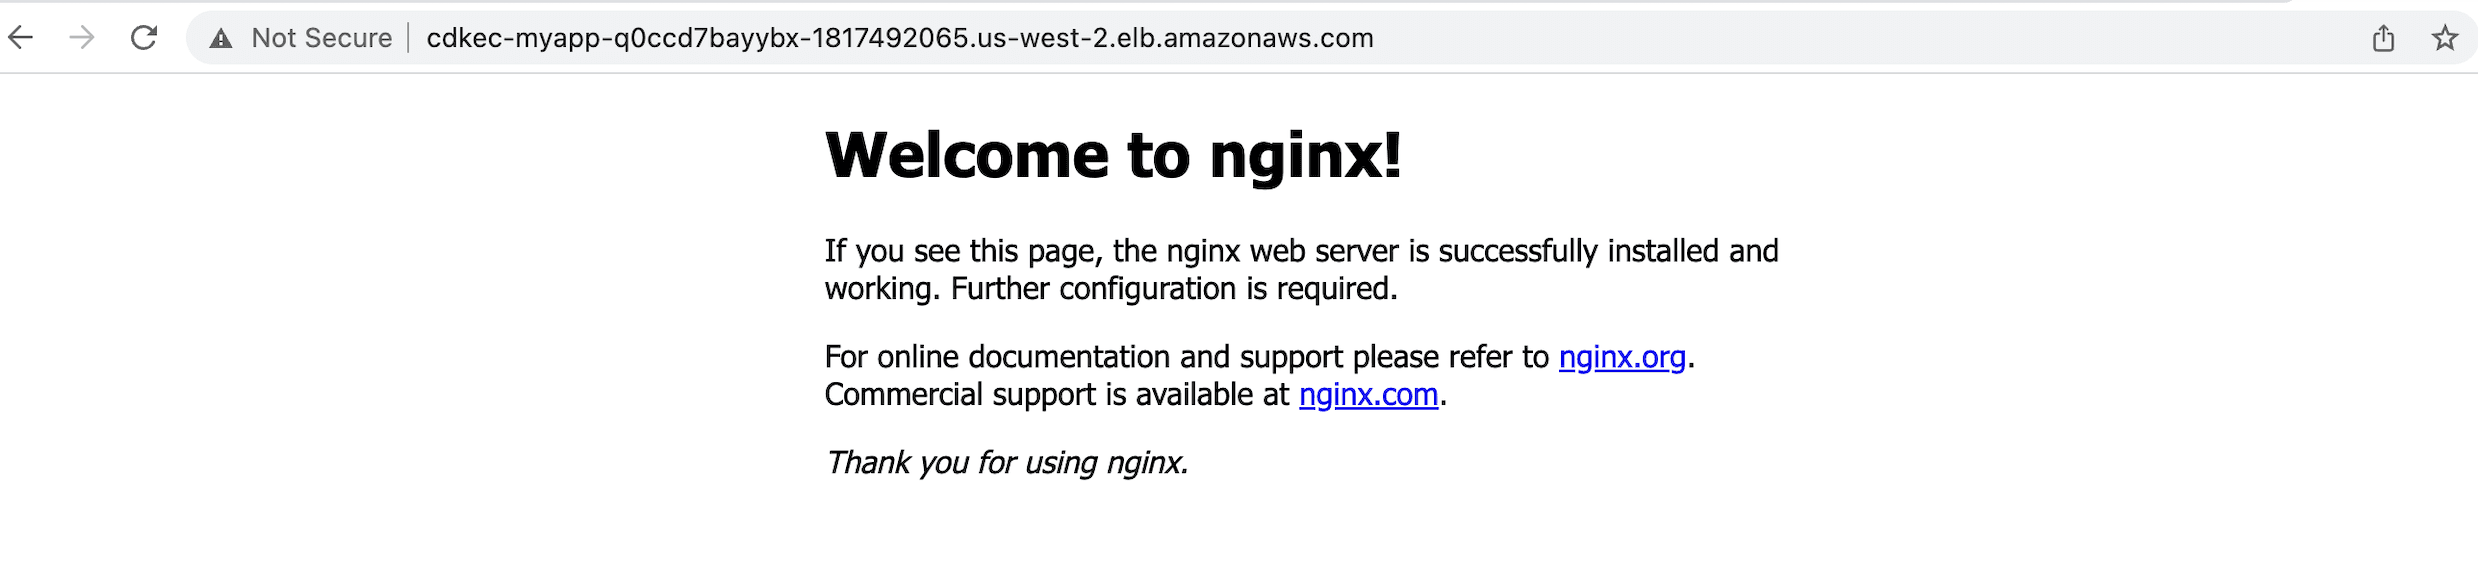 Default Nginx welcome page in the browser